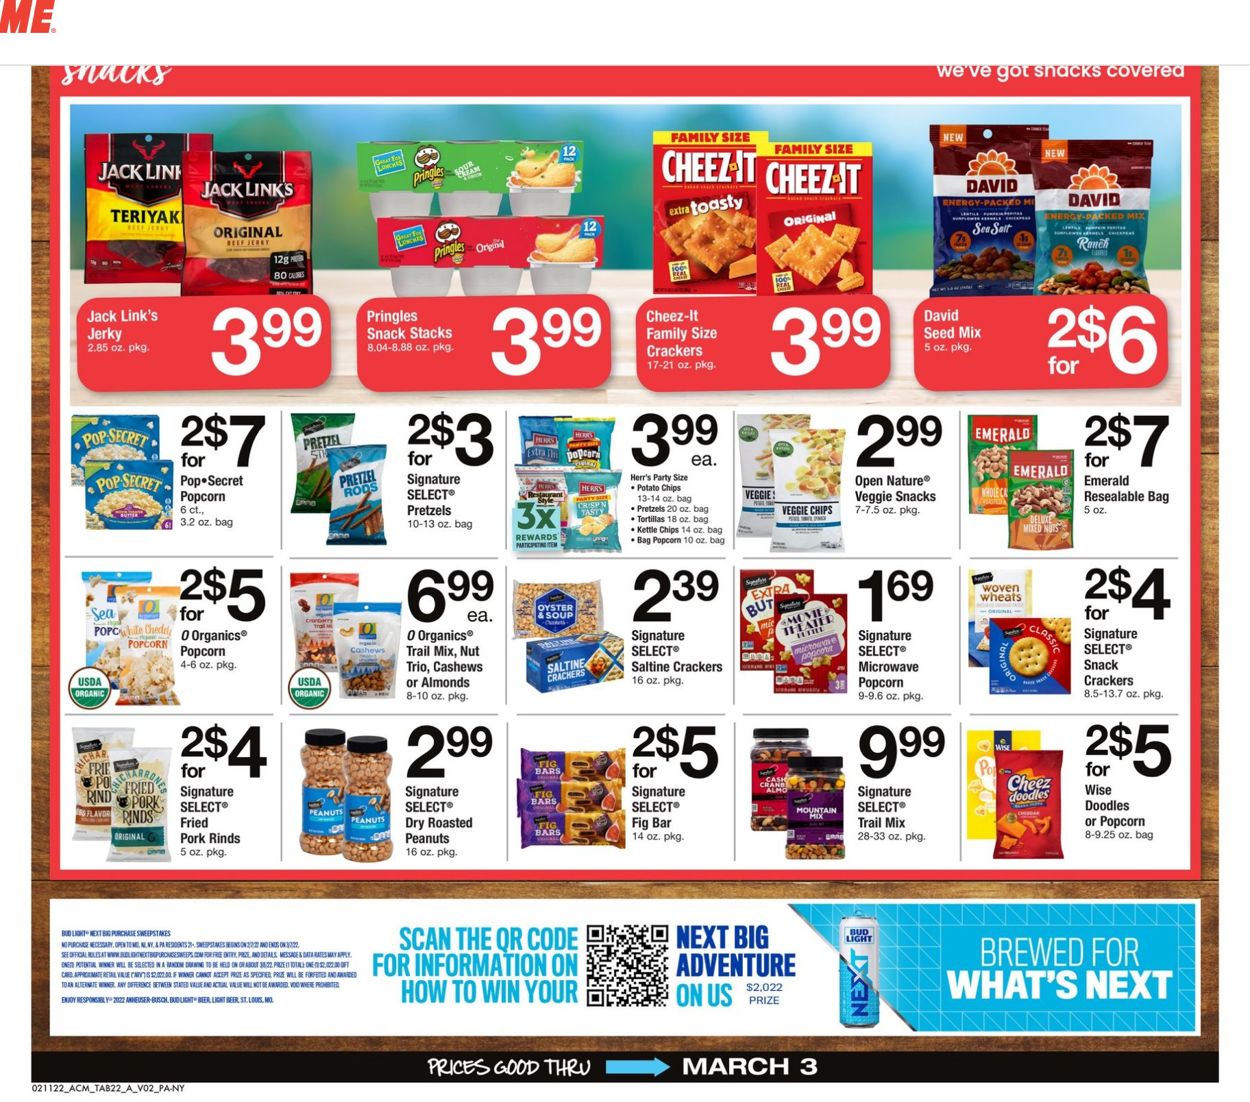 Acme Ad from 02/11/2022